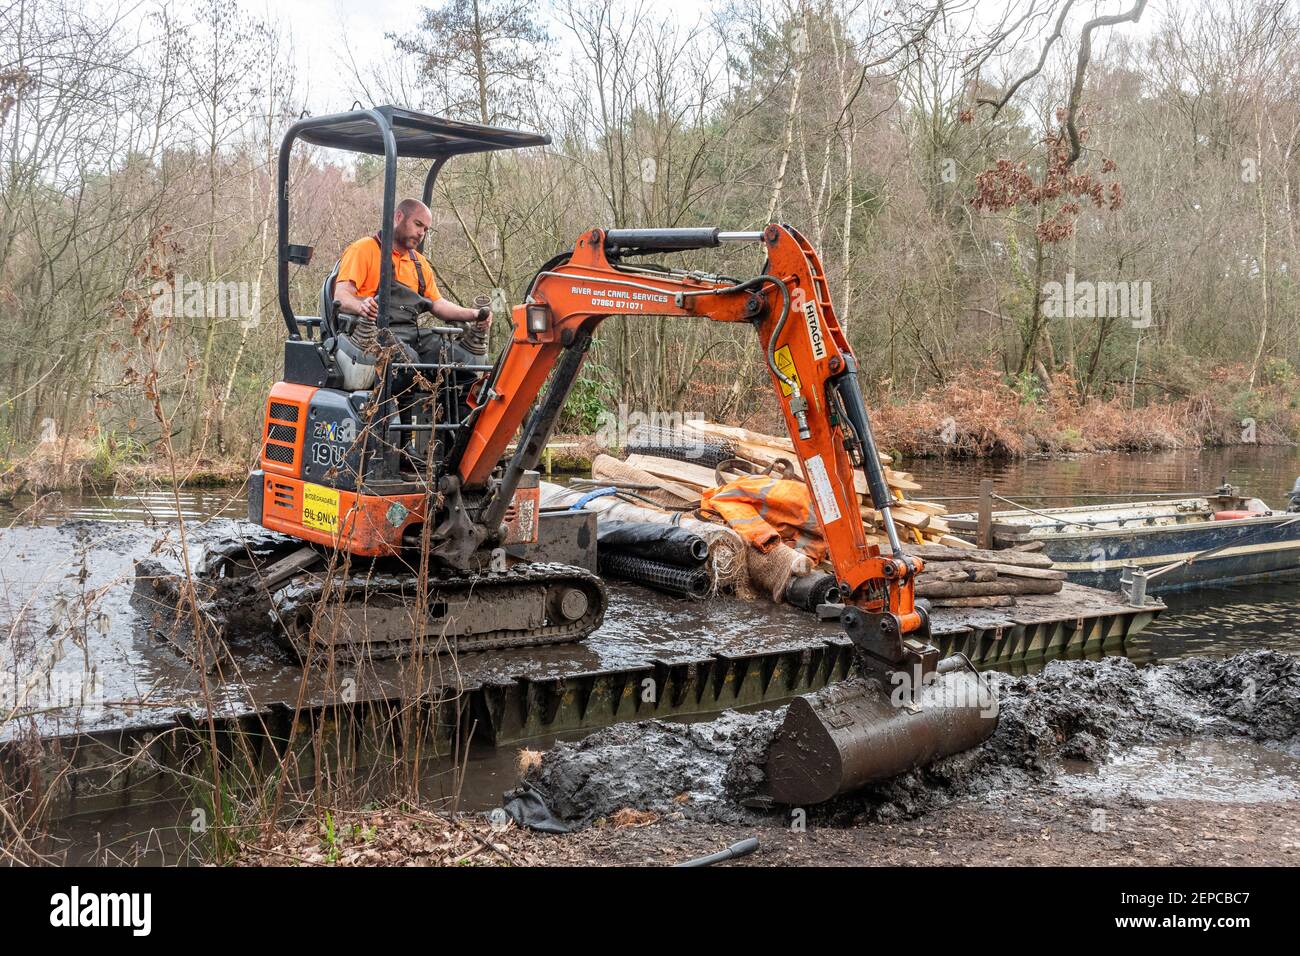 Man working in an excavator or digger on a floating work pontoon repairing an eroded canal bank on Basingstoke Canal in Surrey, UK Stock Photo